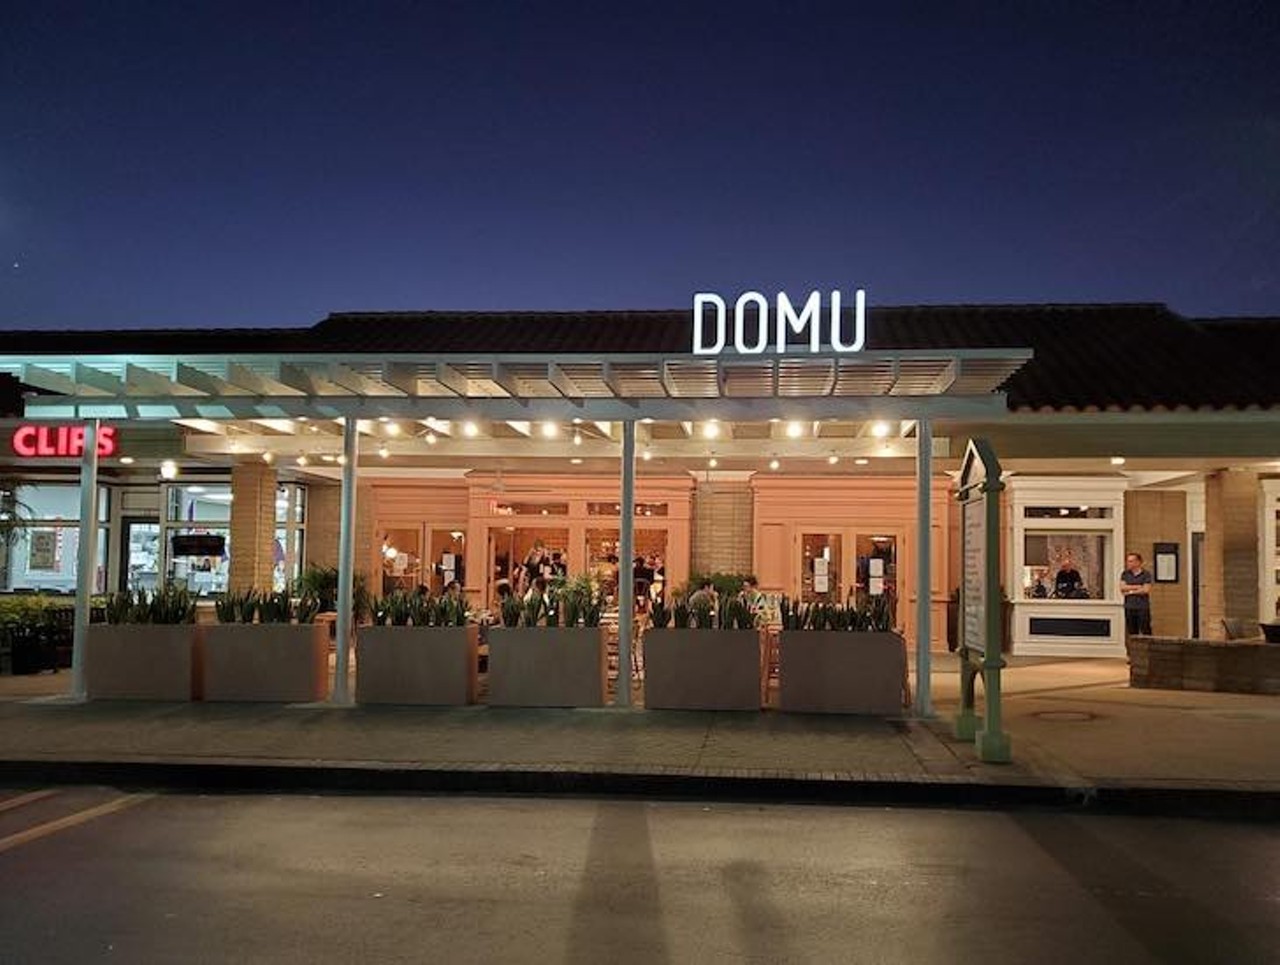 Domu 
3201 Corrine Drive. 407-960-1228
Domu has reopened for both lunch and dinner, Dining is patio-only for now with tables spaced six feet apart, and parties of four maximum being seated. Lunch is take-out and delivery only, dinner service allows for patio seating.
Photo via Domu/Facebook